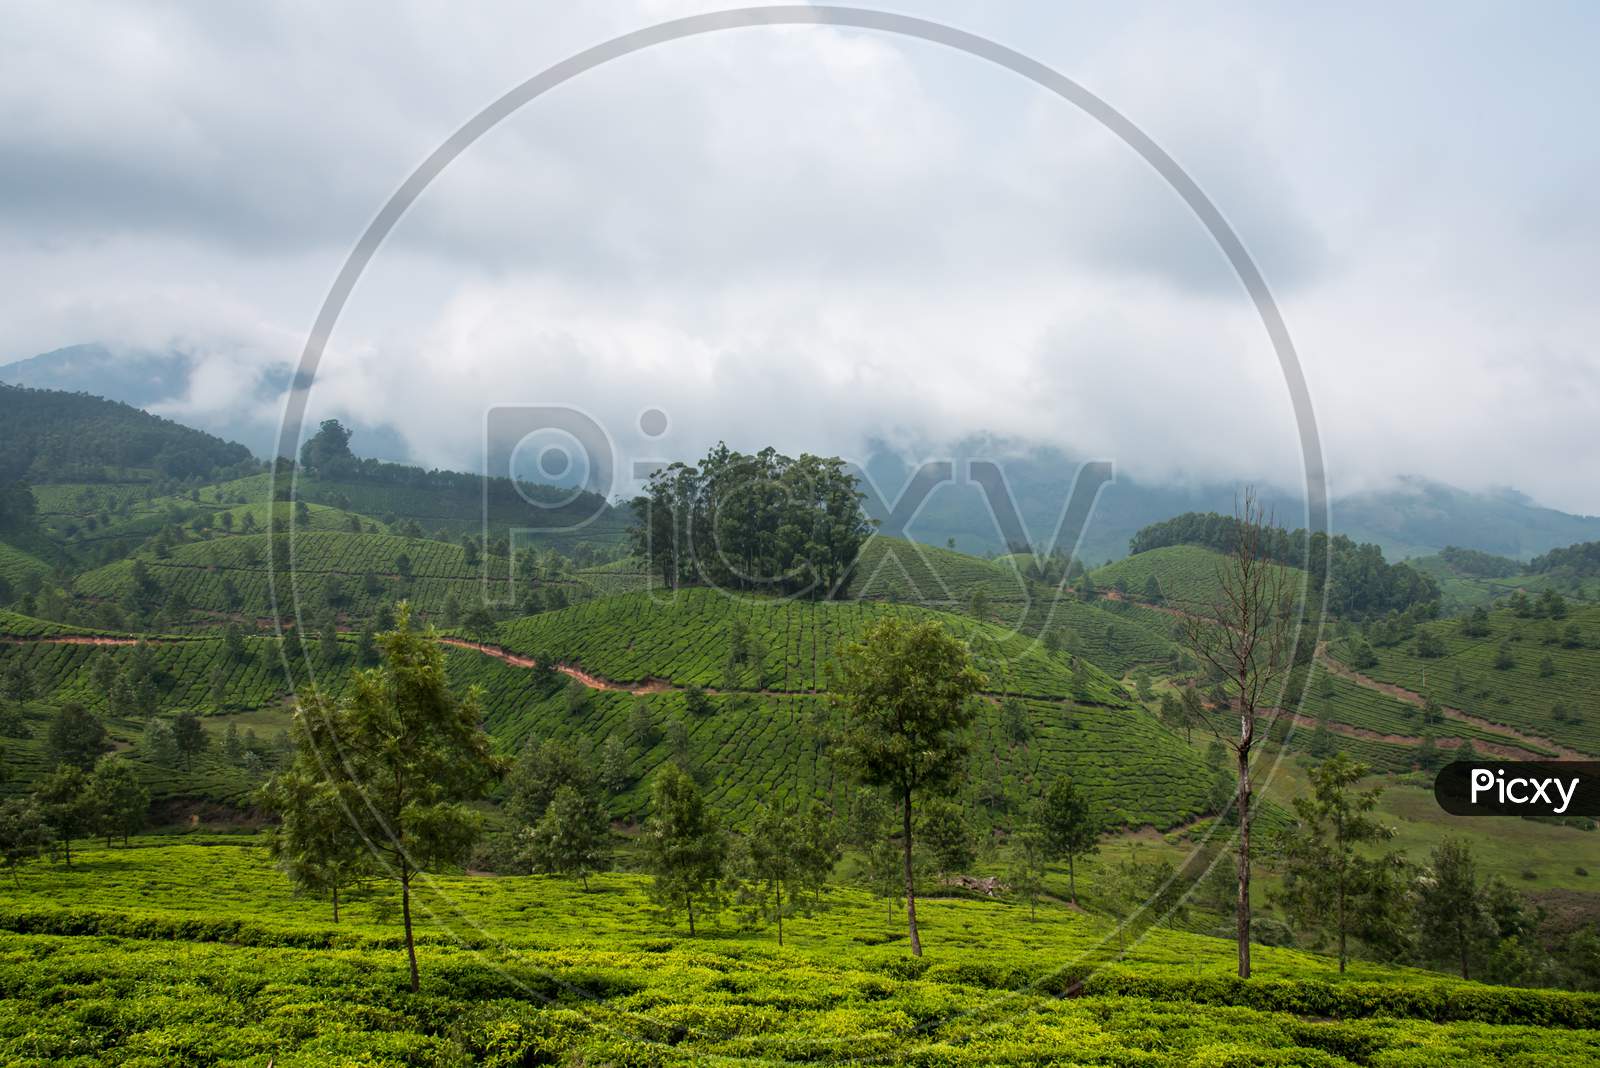 Dense fog and clouds over beautiful tea gardens